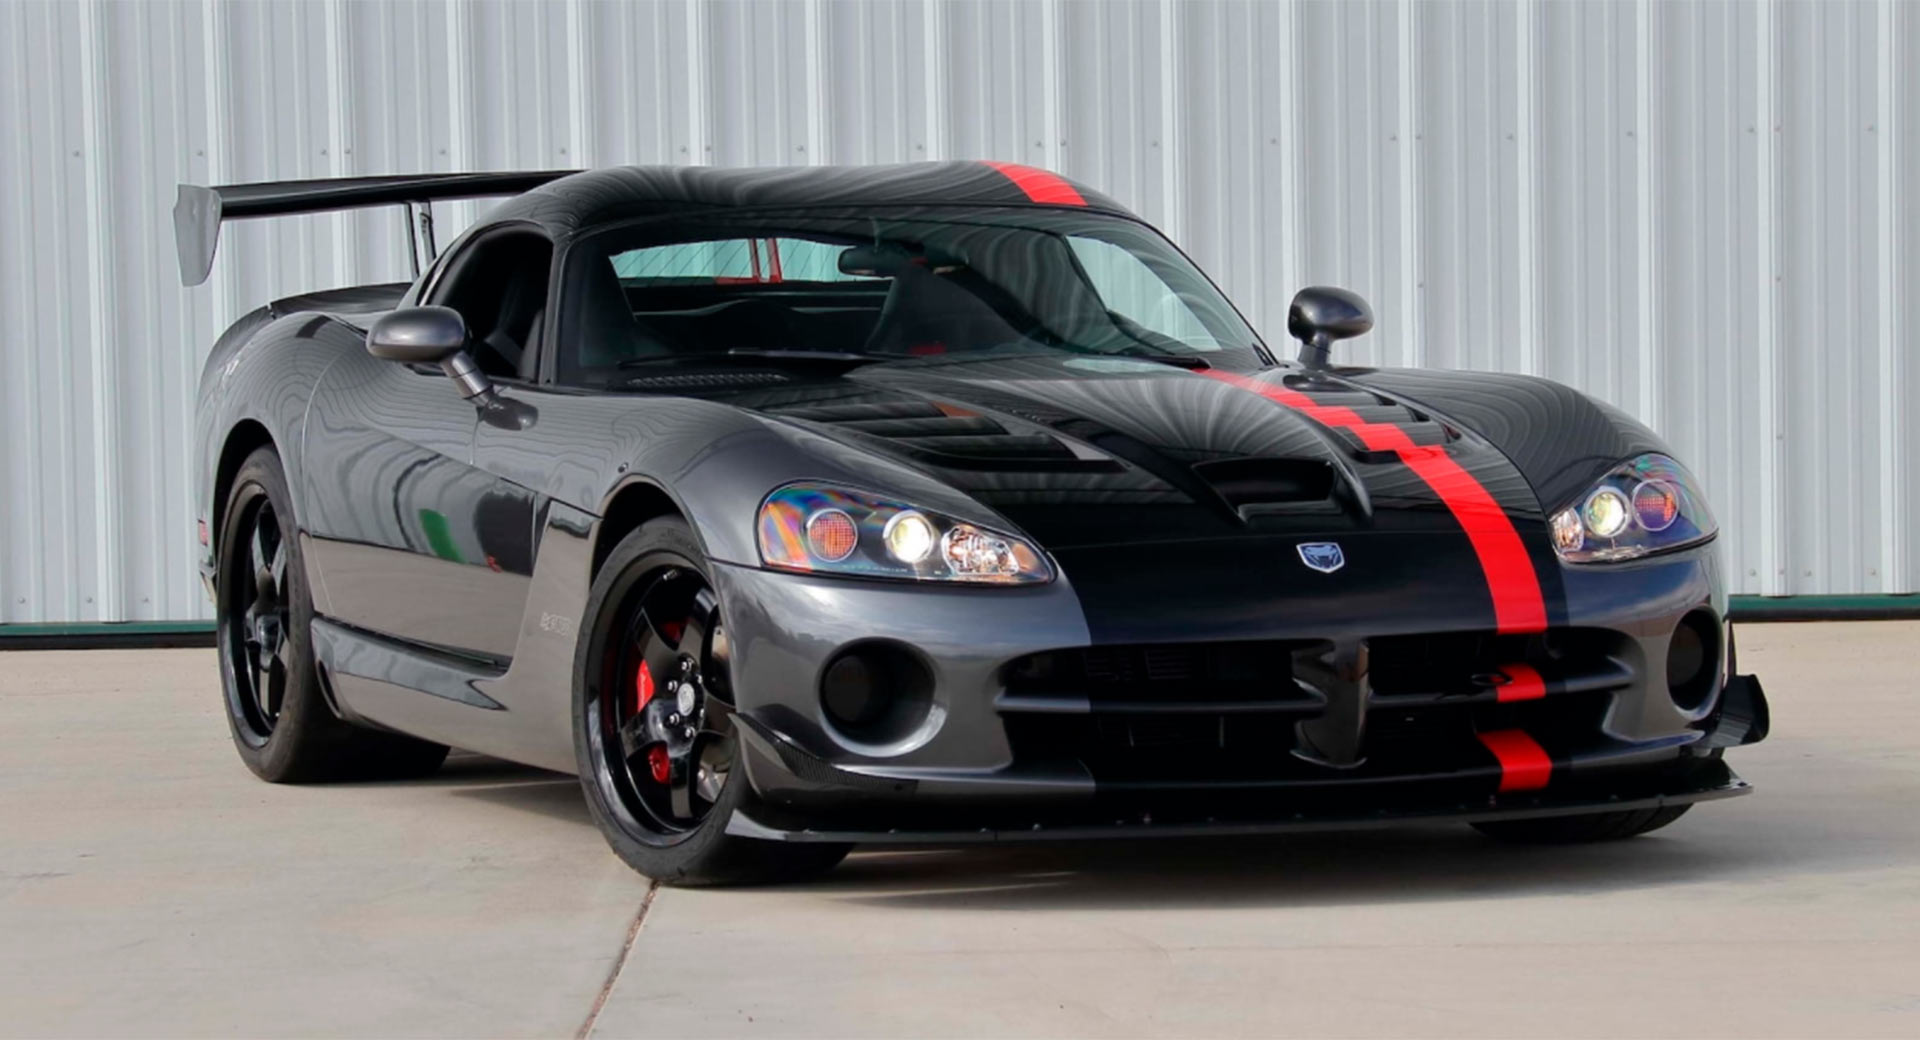 Now Is The Time To Buy A Low Mileage 2009 Dodge Viper ACR | Carscoops